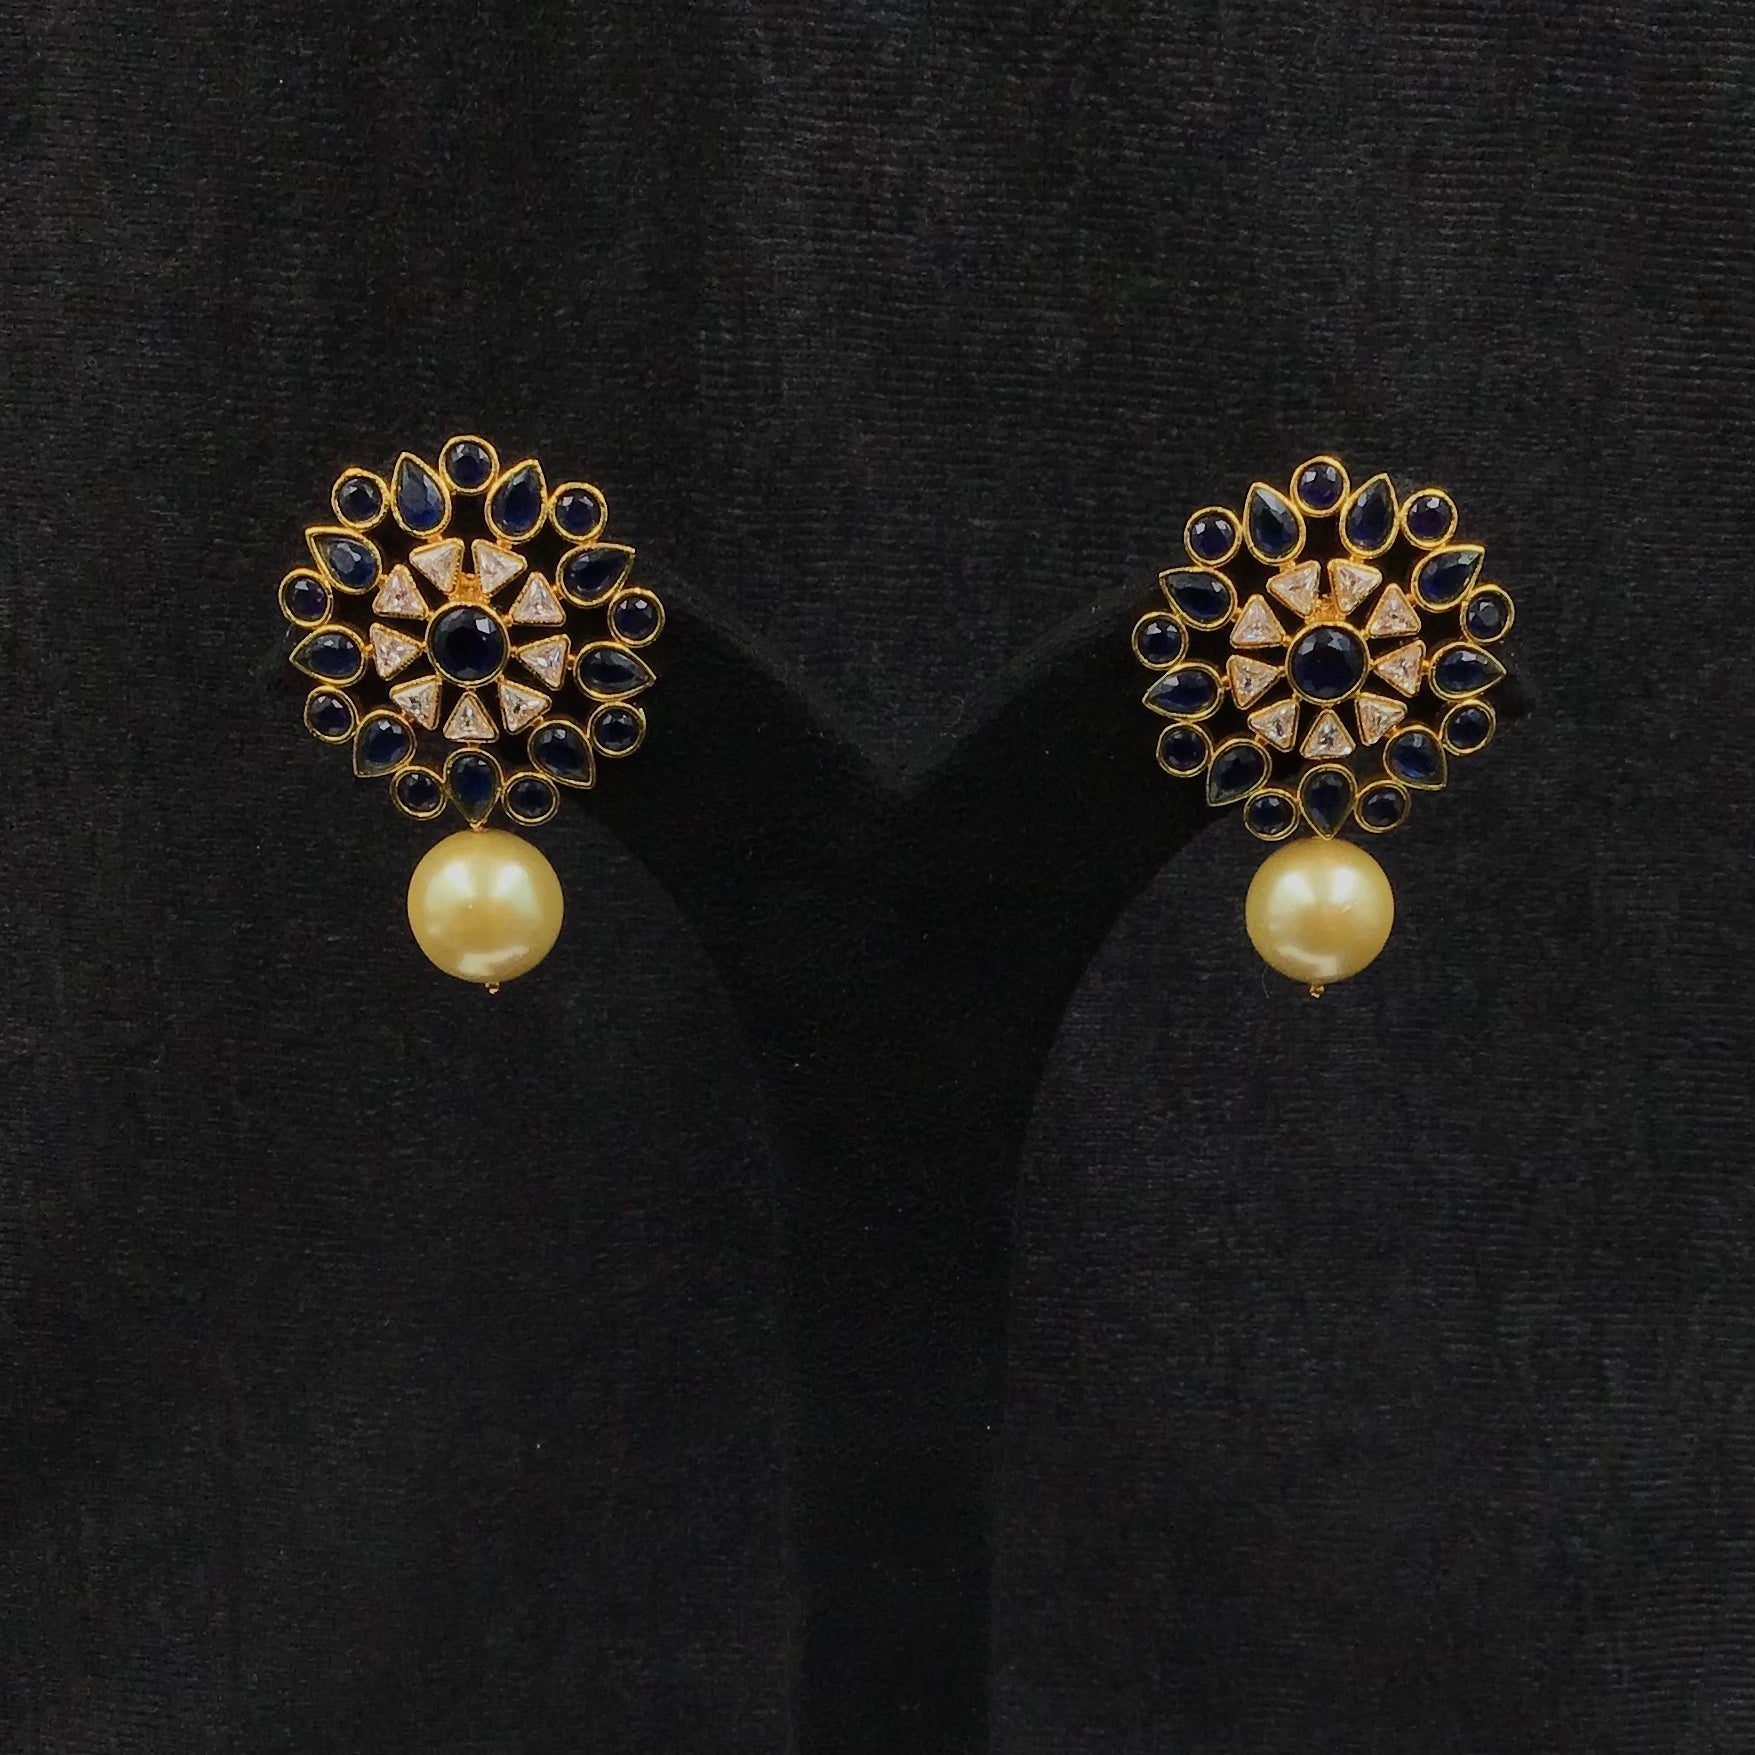 Gold plated tops/studs Earring 9366-100 - Dazzles Jewellery